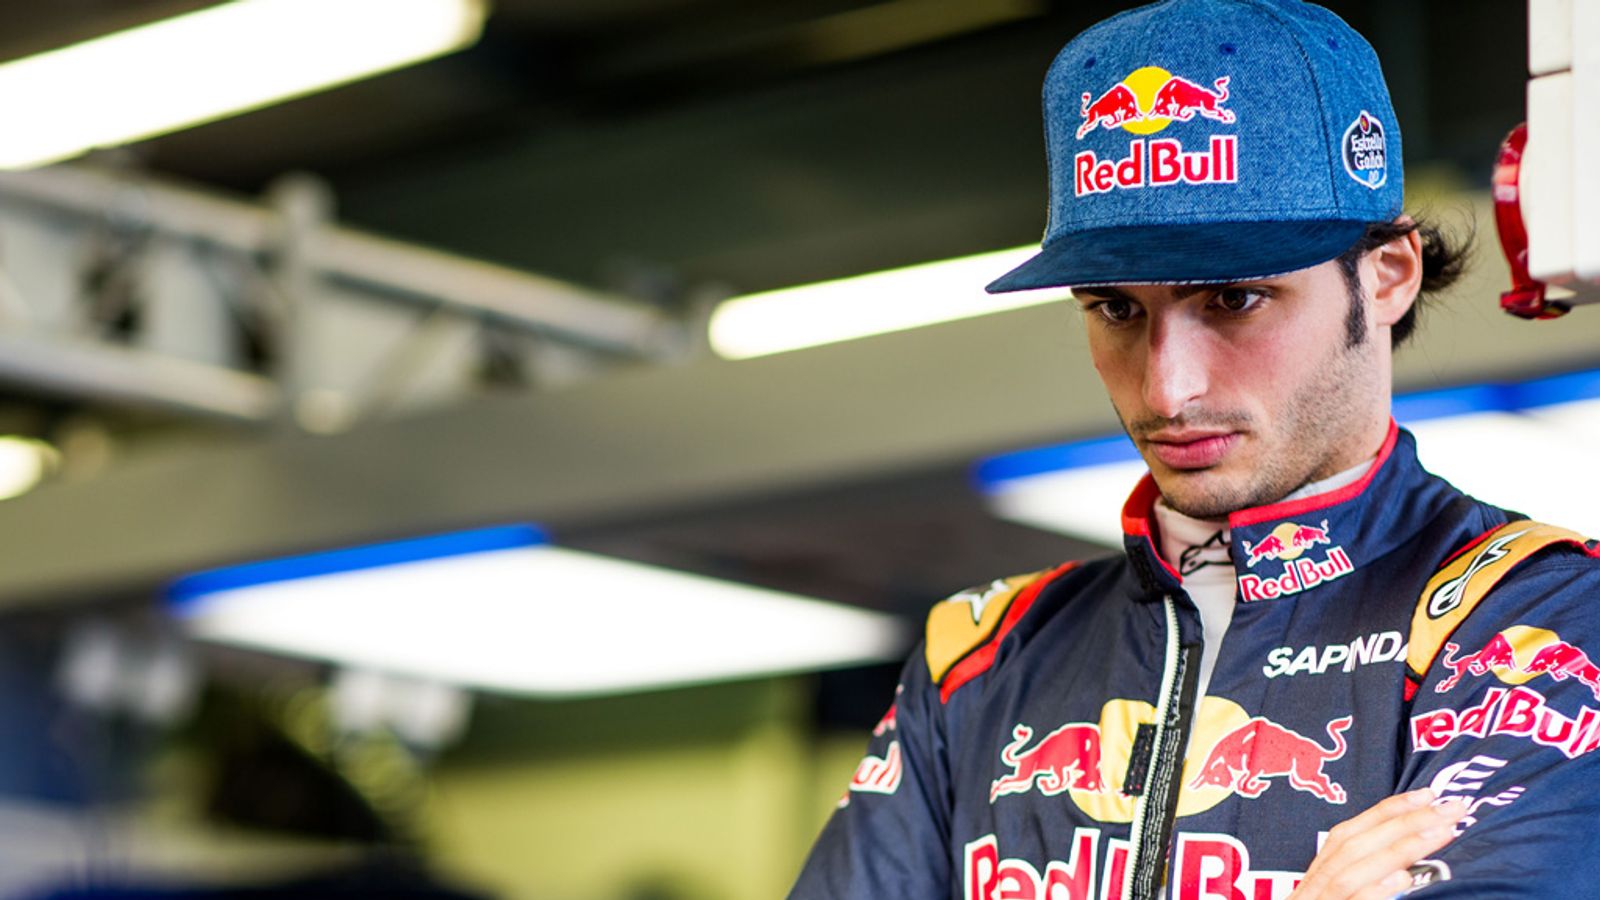 Where next for the ever-improving but under-rated Carlos Sainz? | F1 News